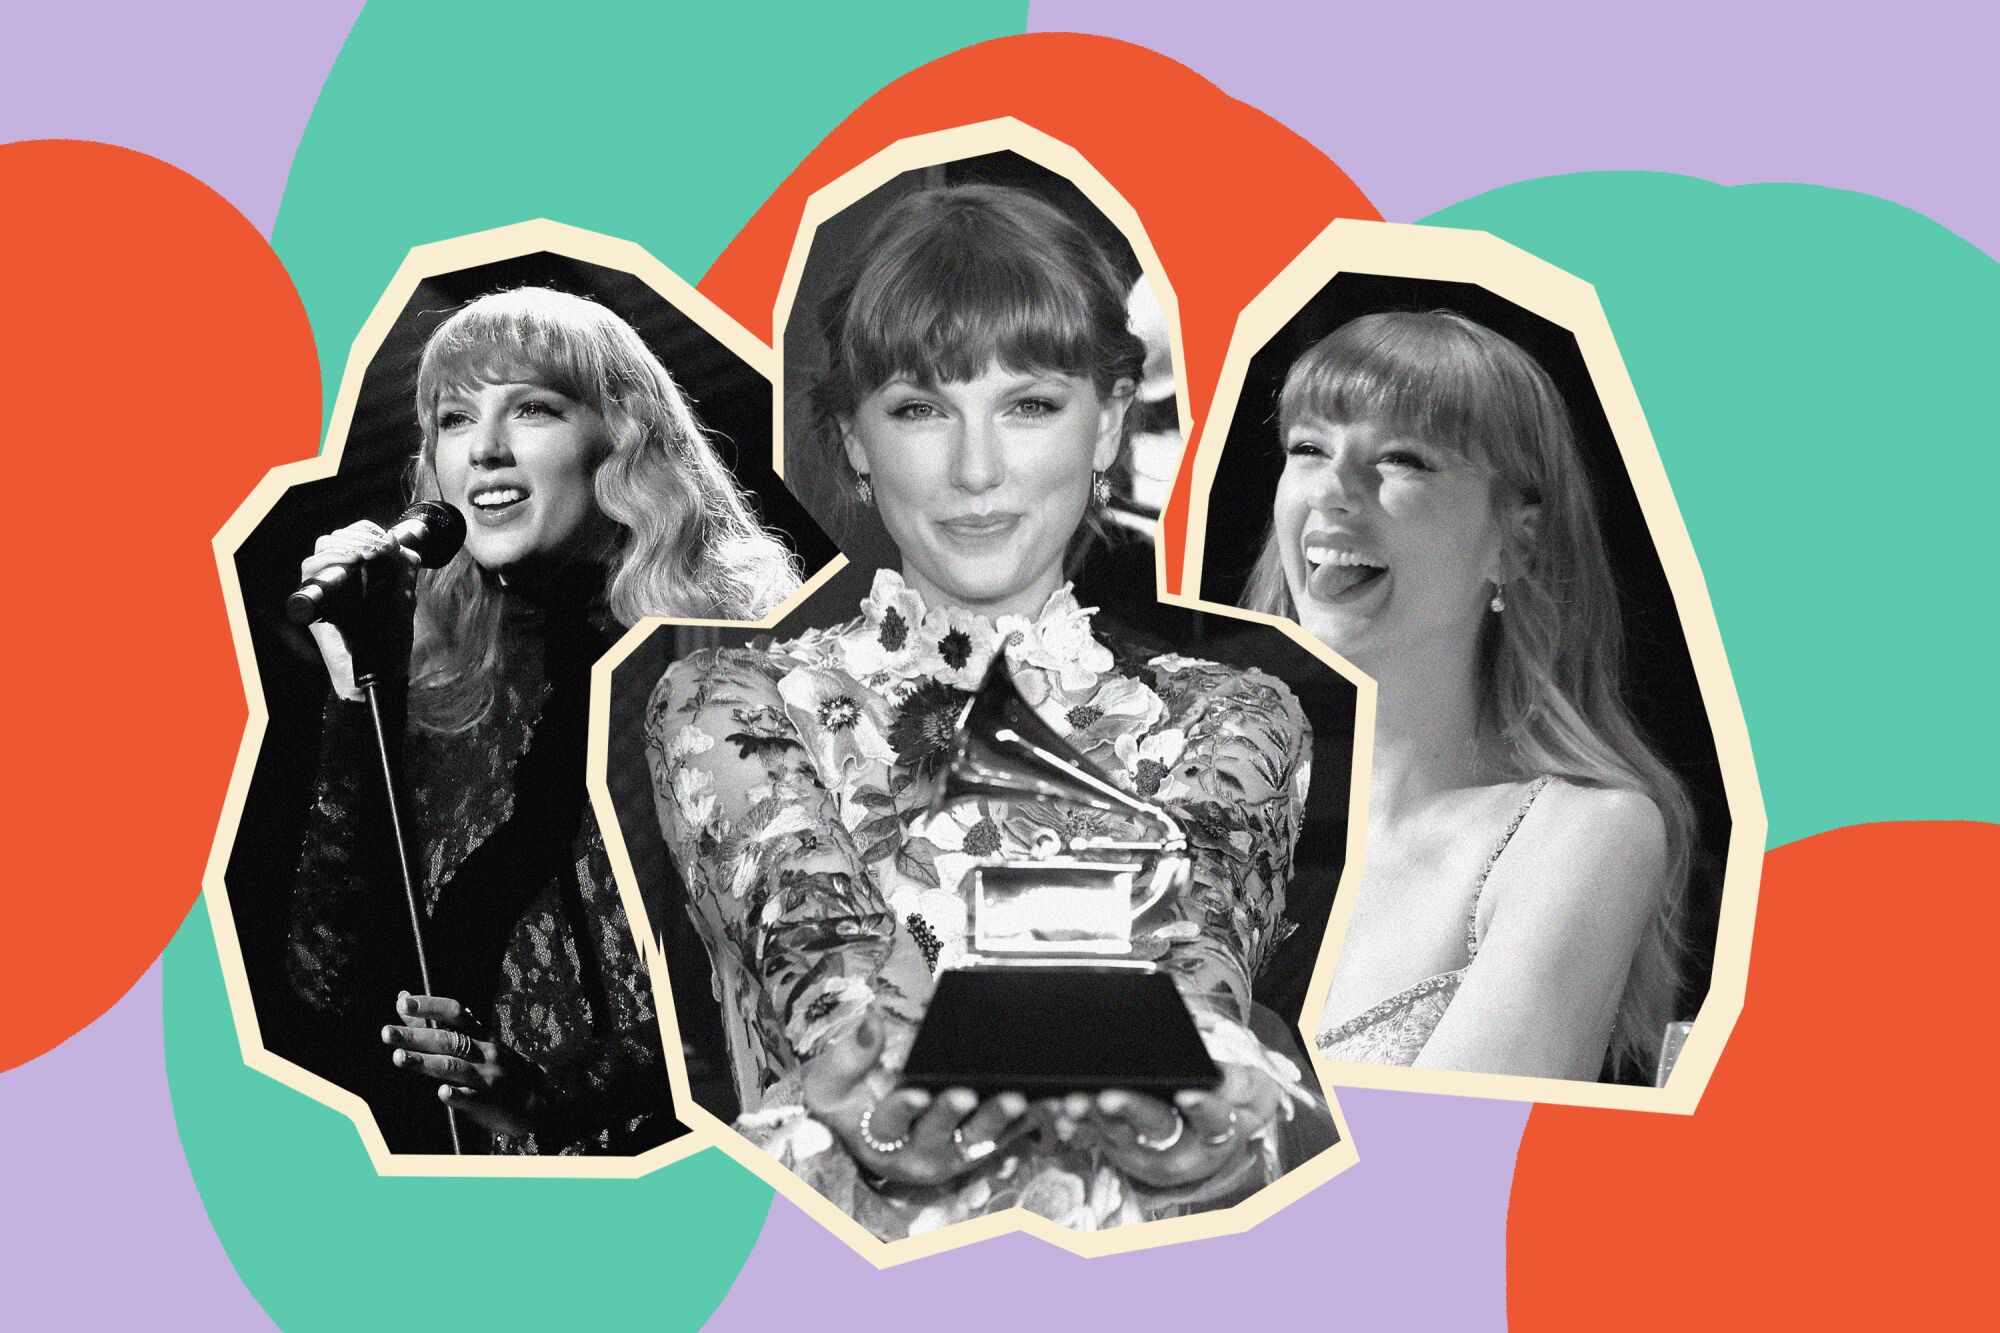 Photo collage of Taylor Swift